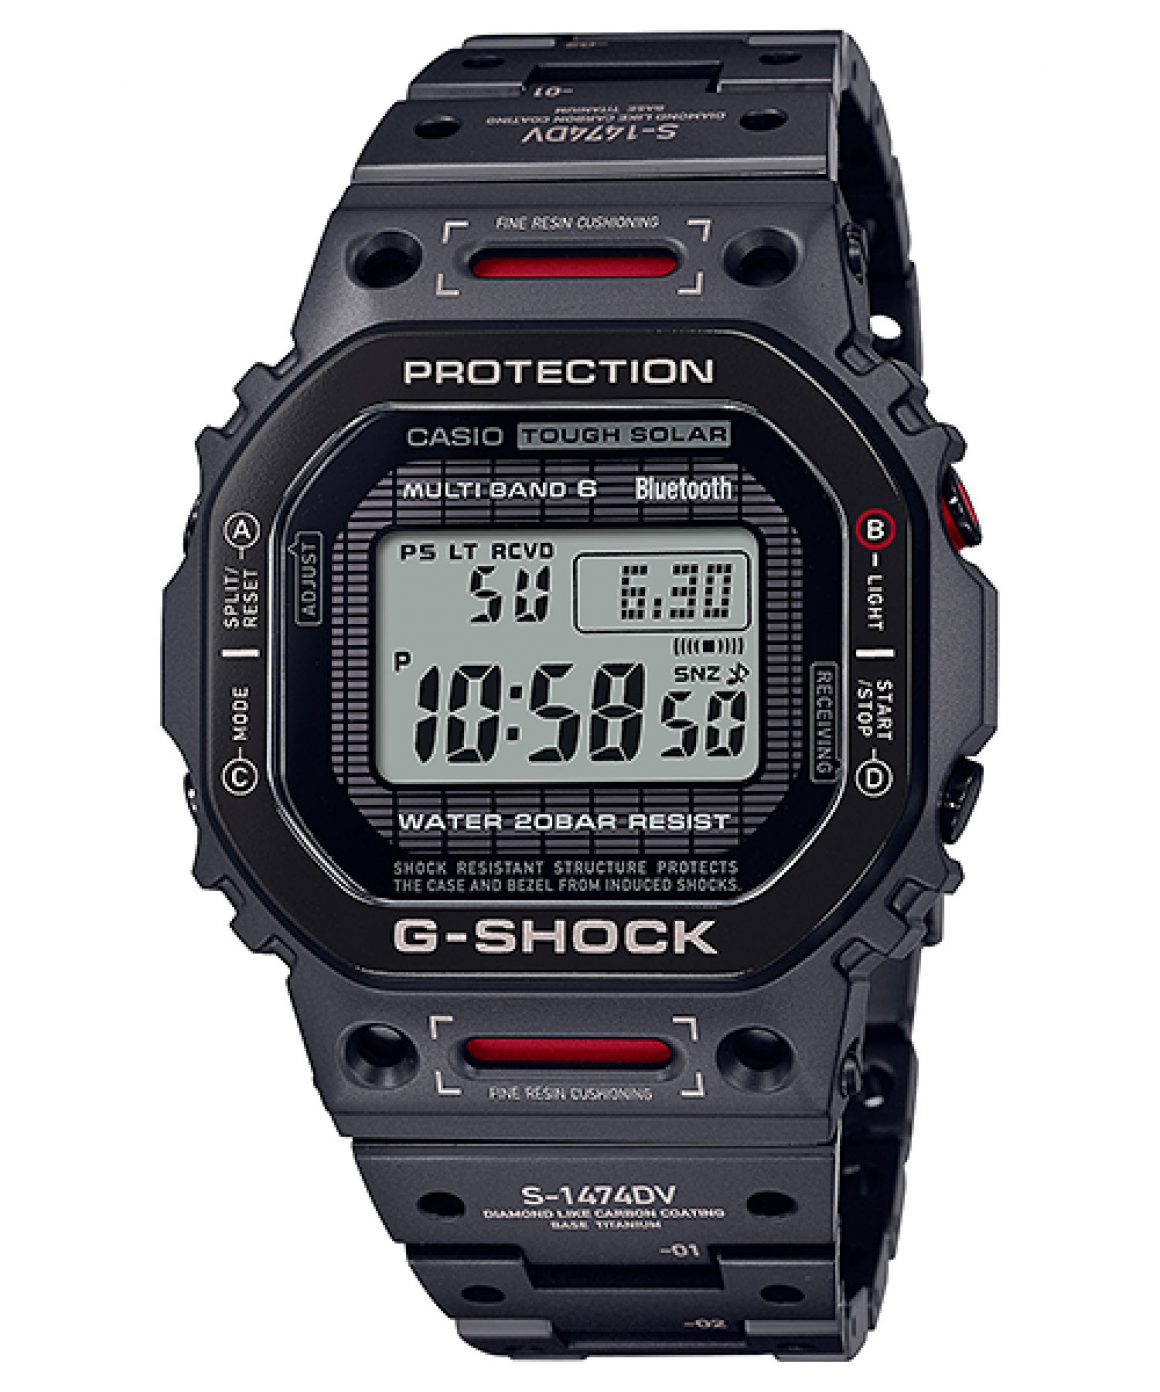 G-SHOCK Unveils the New Full Metal GMW-B5000TVA